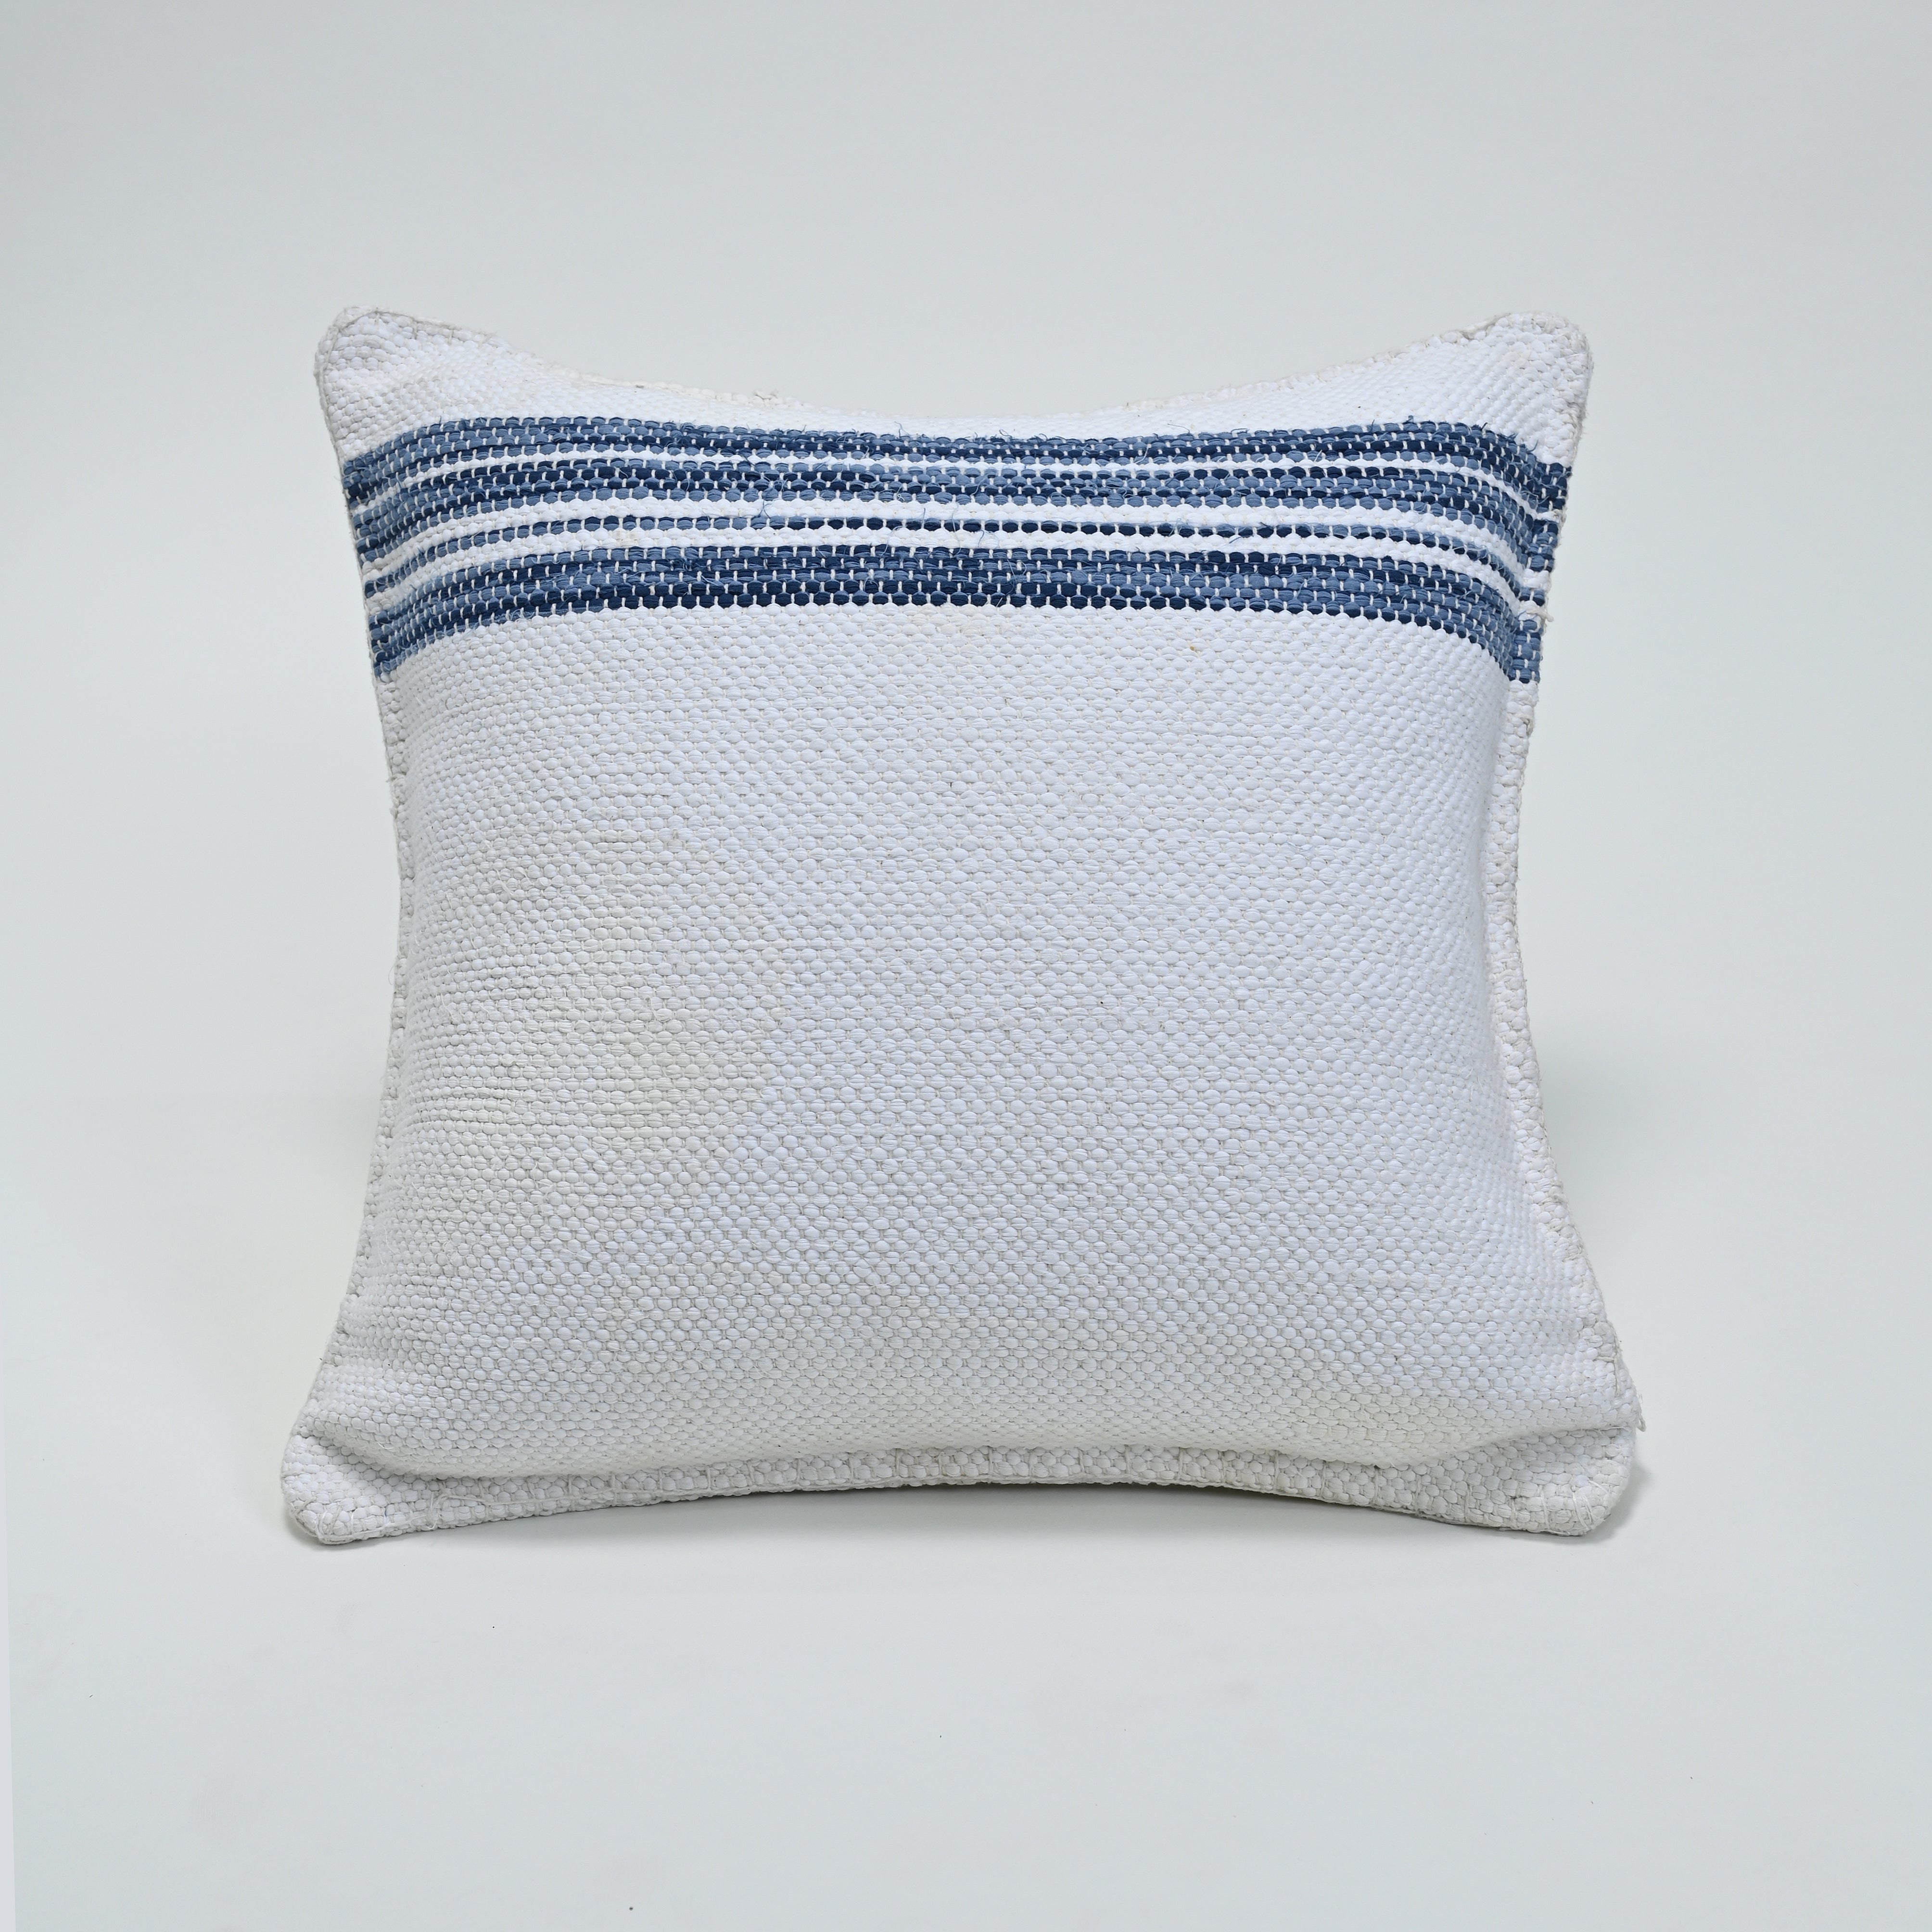 Reclaimed Serenity Cushion Cover